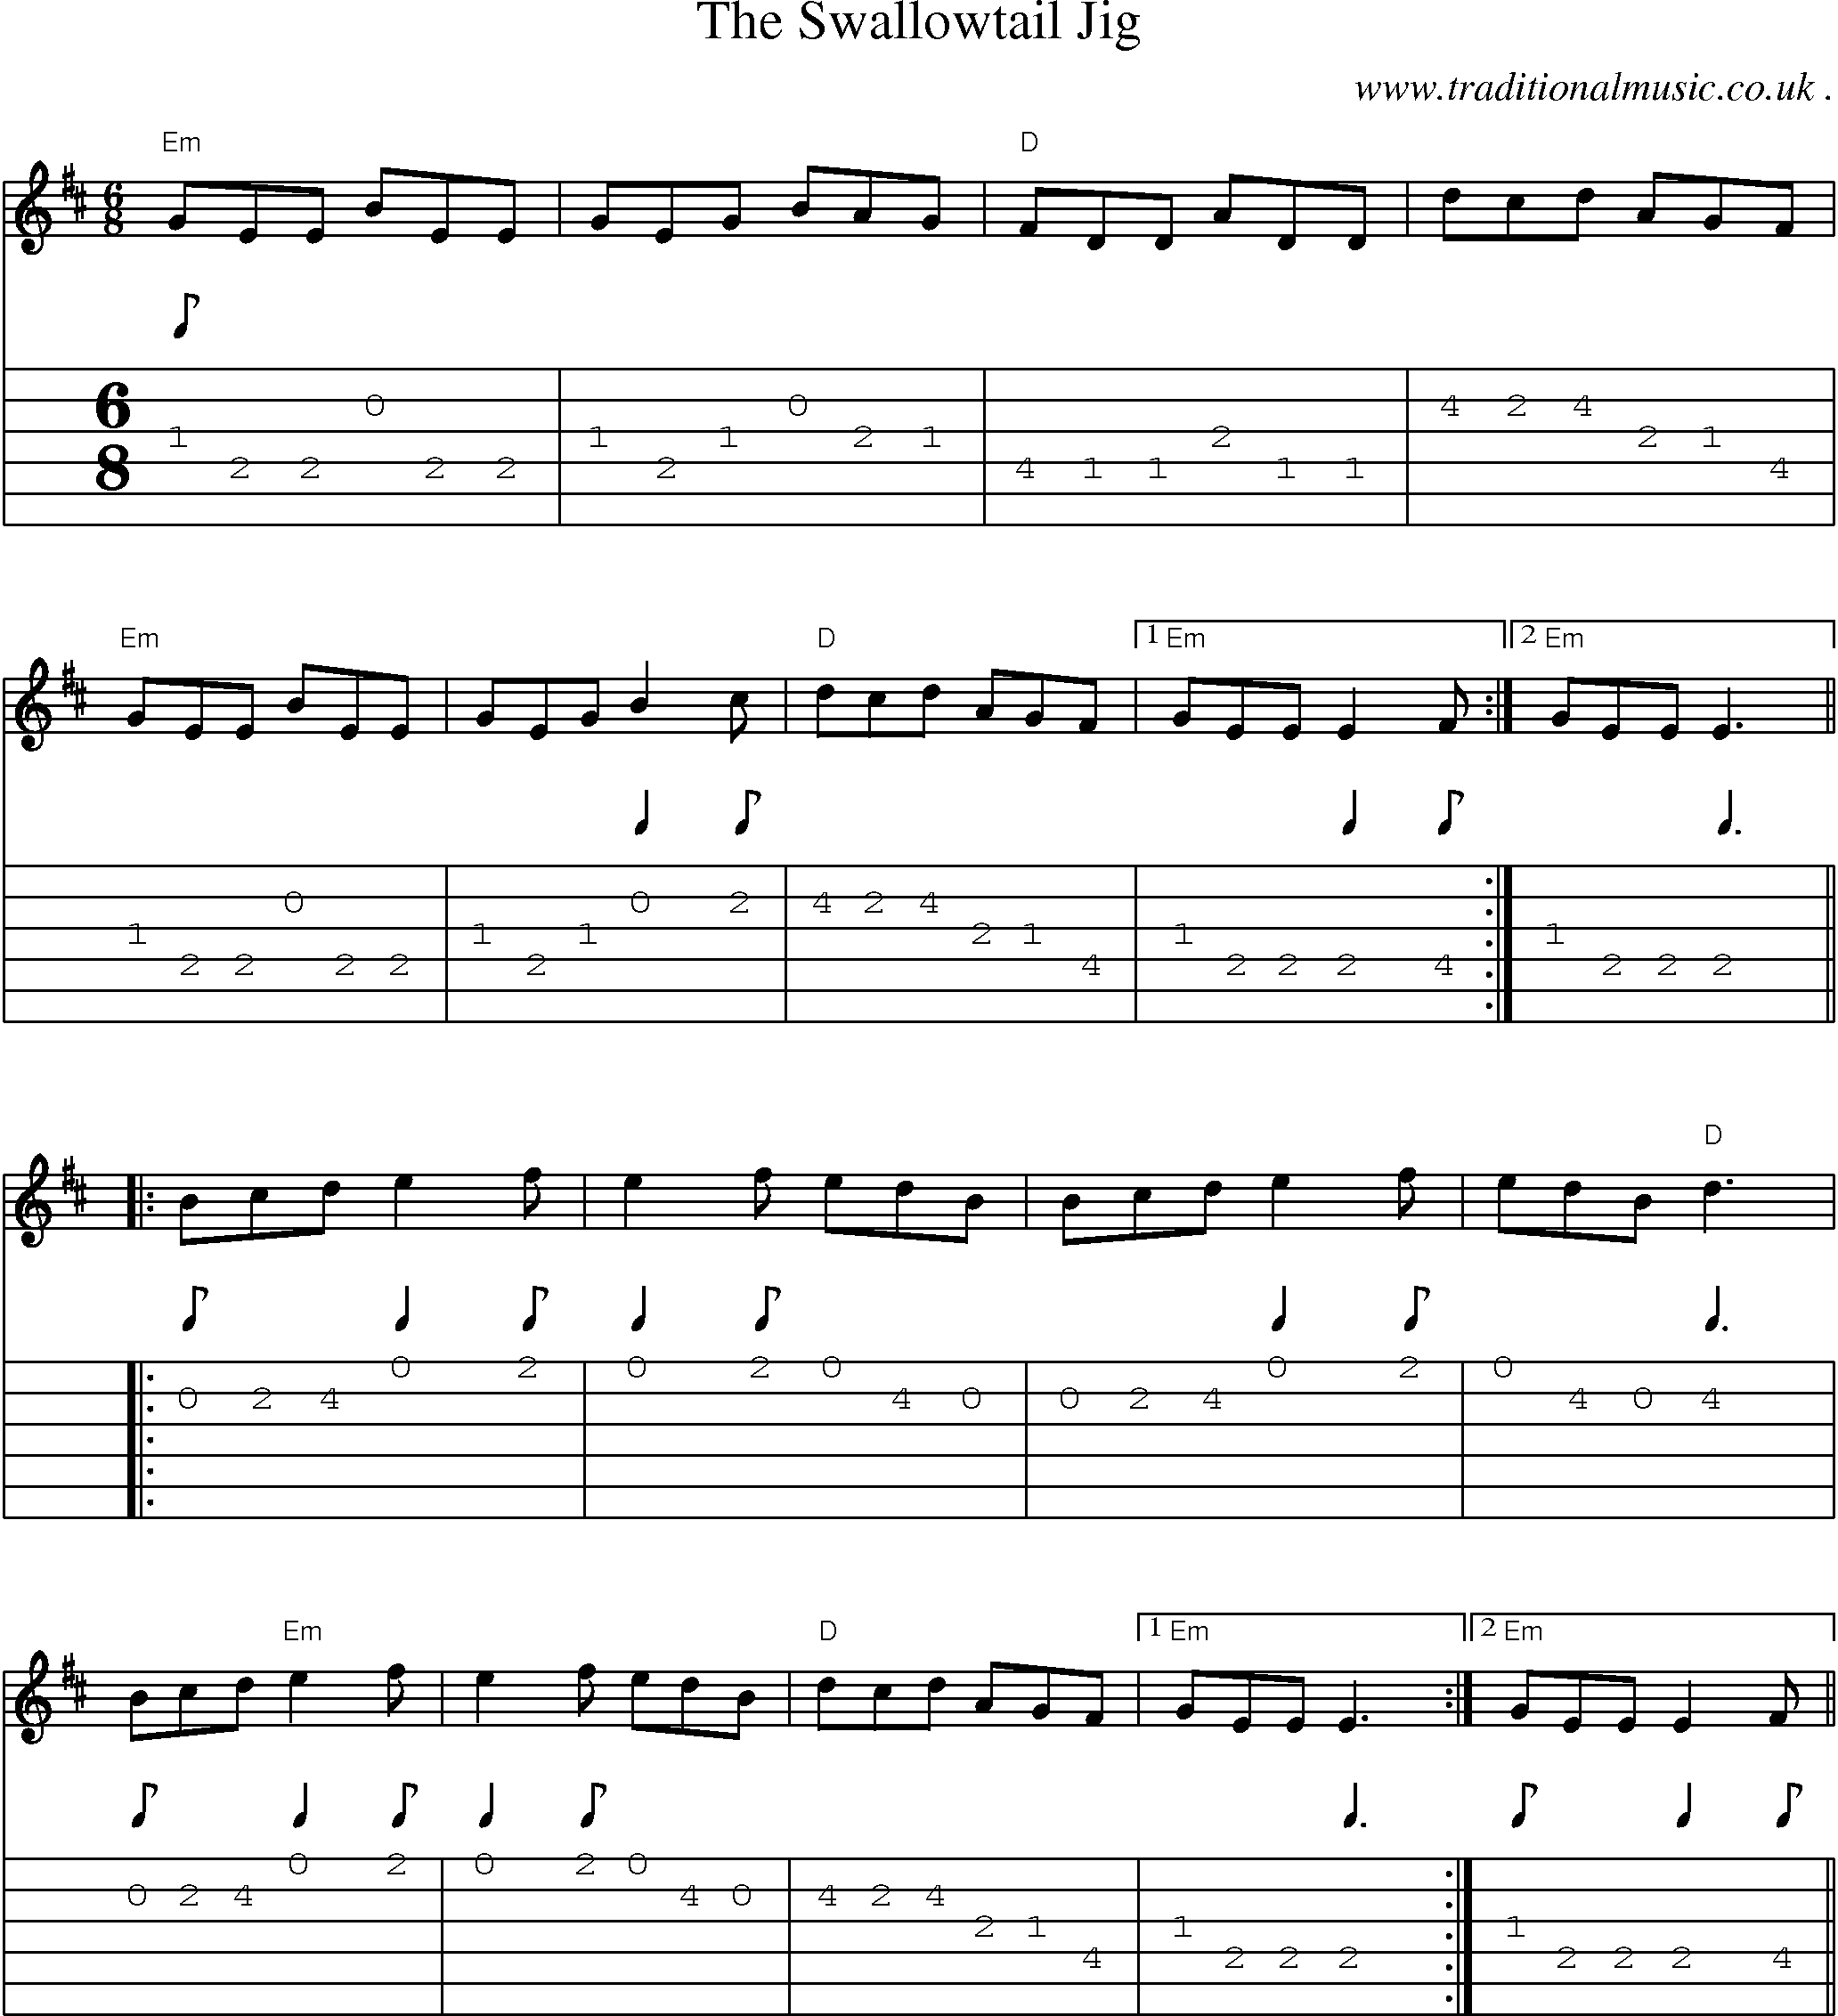 Music Score and Guitar Tabs for The Swallowtail Jig